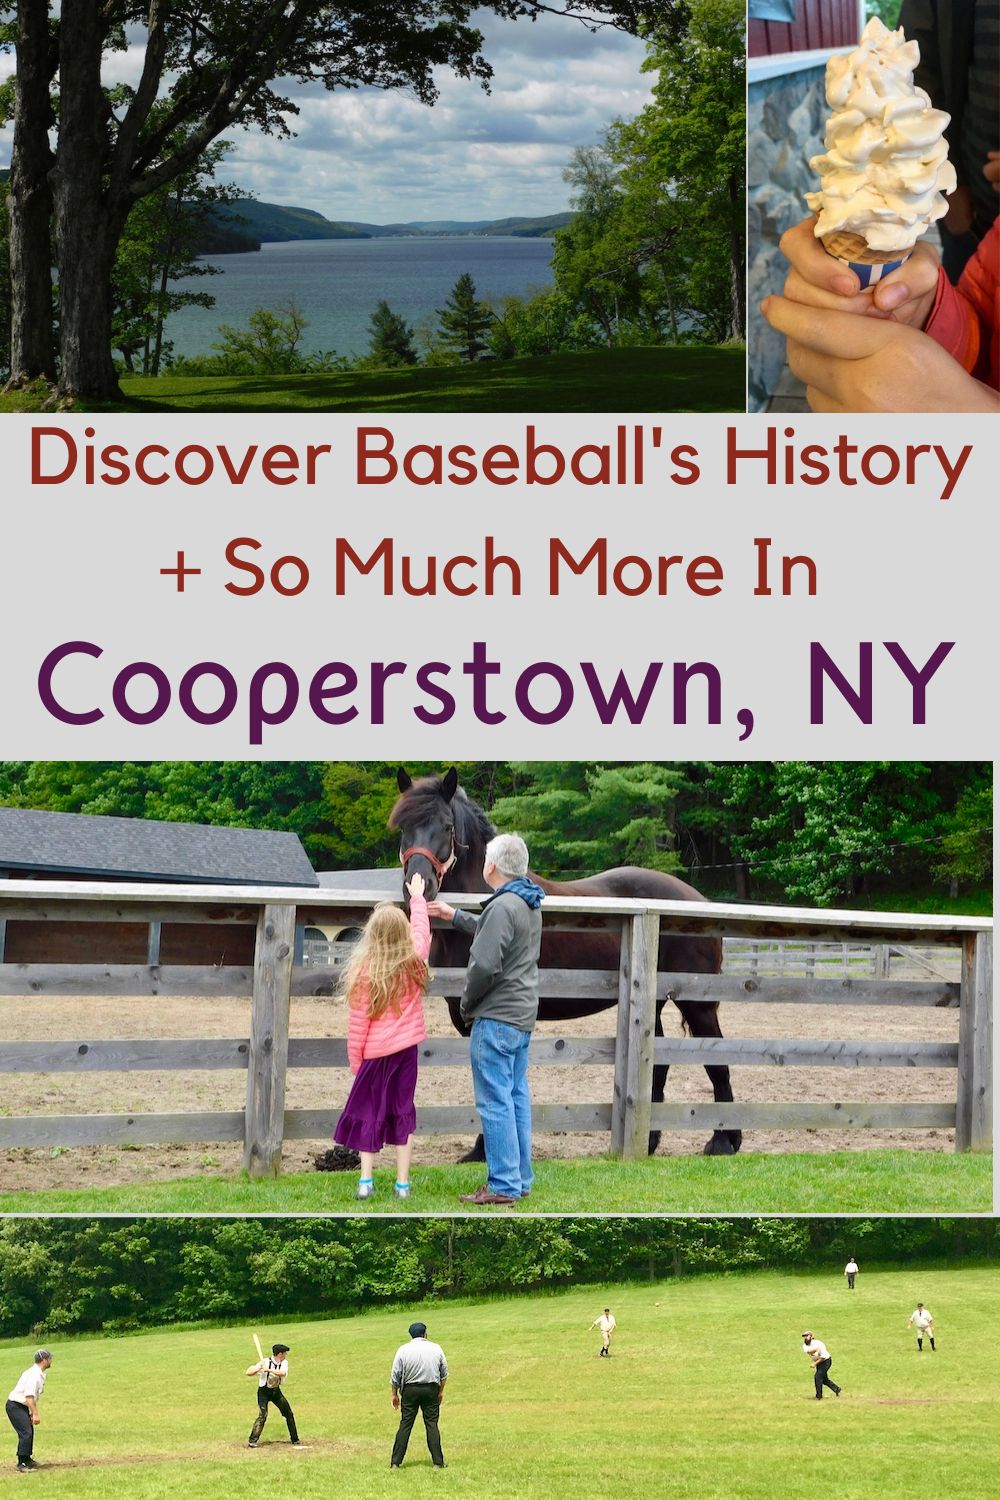 cooperstown, ny is kown for the baseball hall of fame, but don't miss the historic otsego resort, the farm museum, cider mill, local breweries and otsego lake  when you visit with kids. 